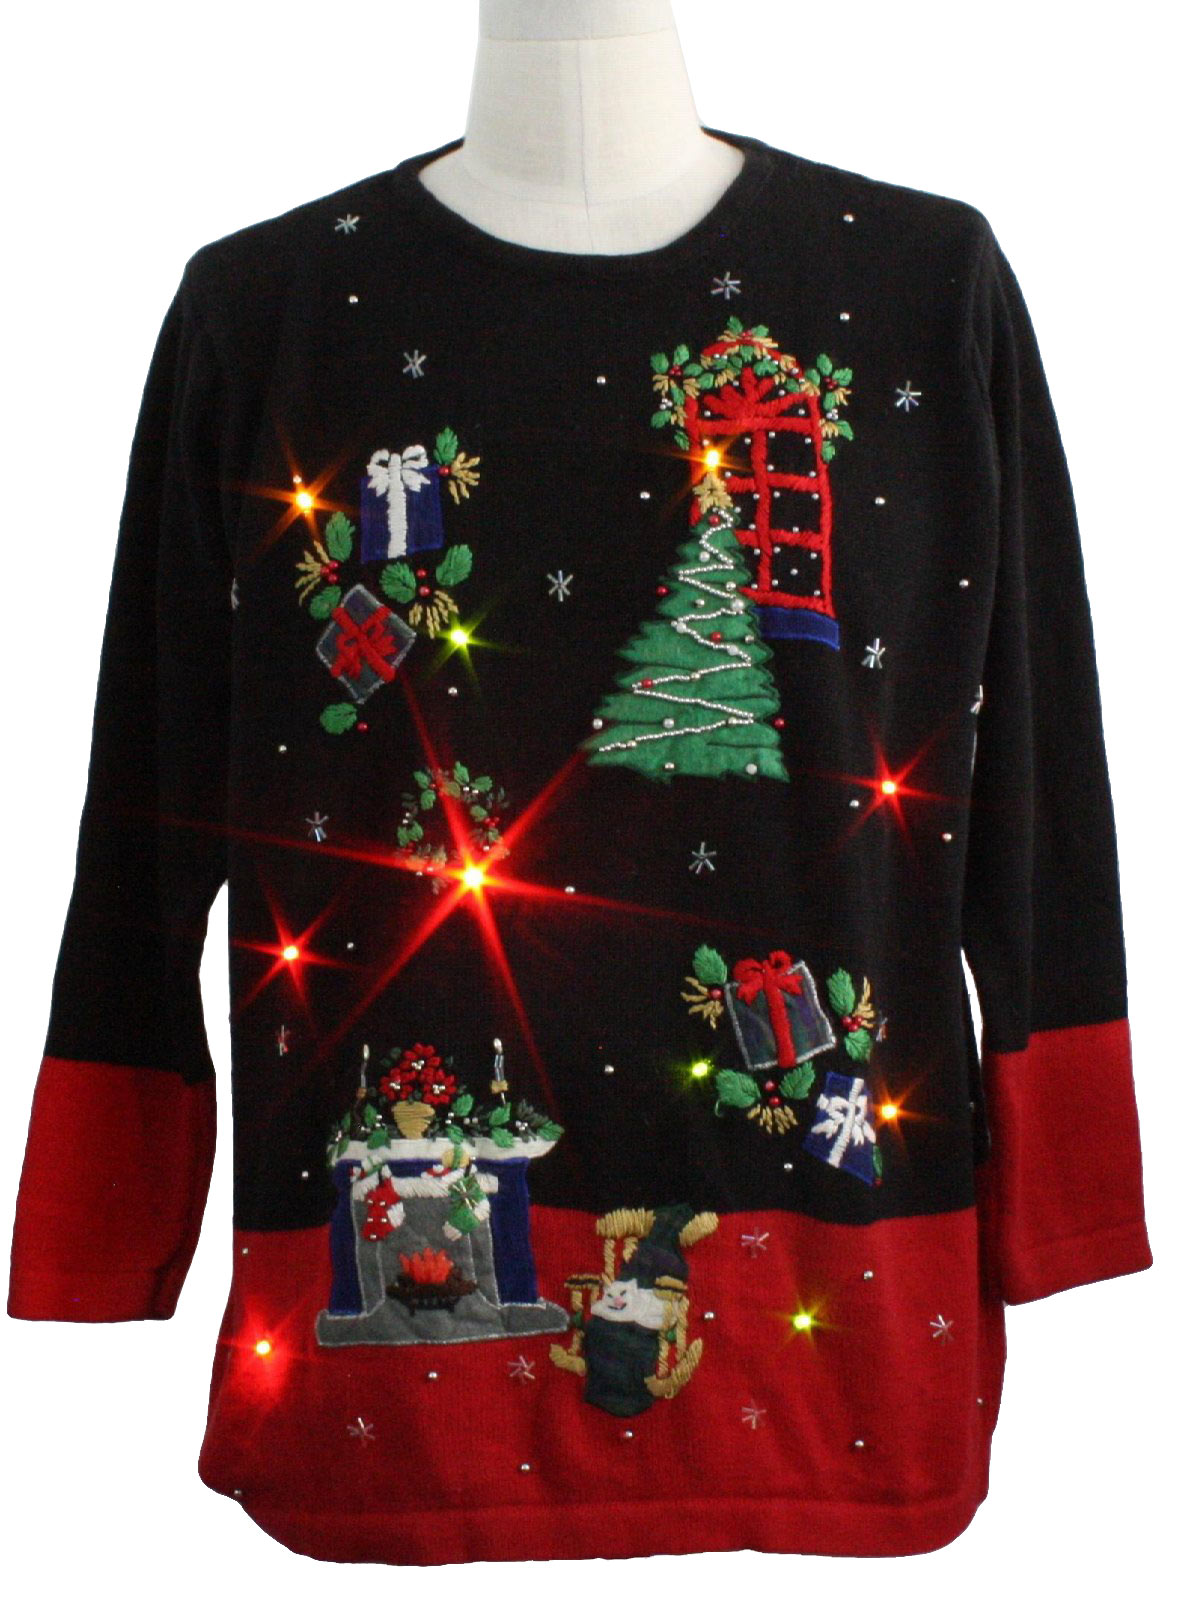 Lightup Ugly Christmas Sweater: -BP Design- Unisex black and red ...